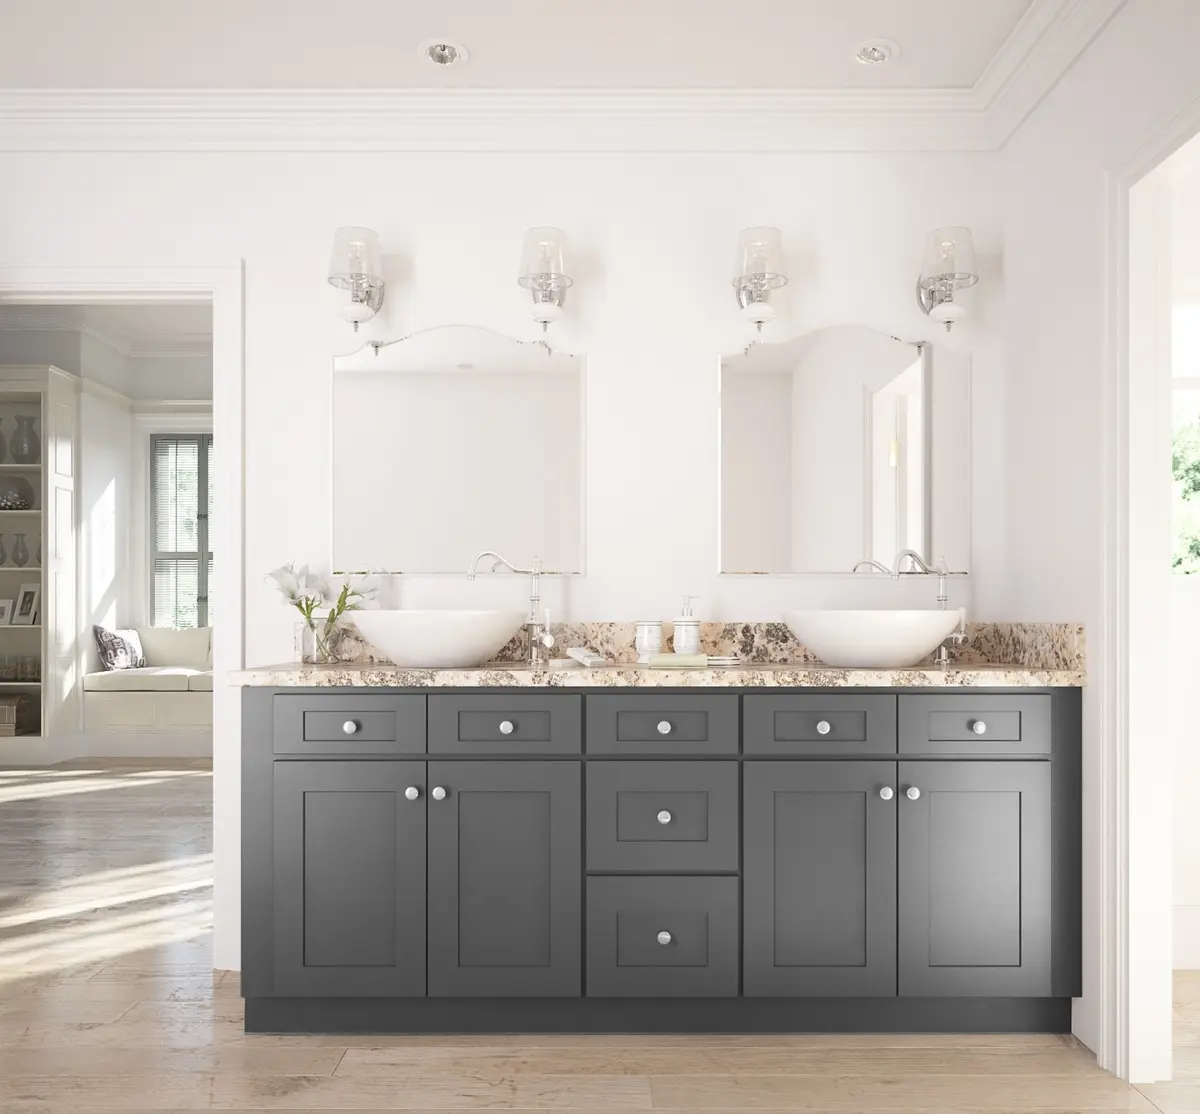 Factory supply modern high quality bathroom vanity cabinet design in gray